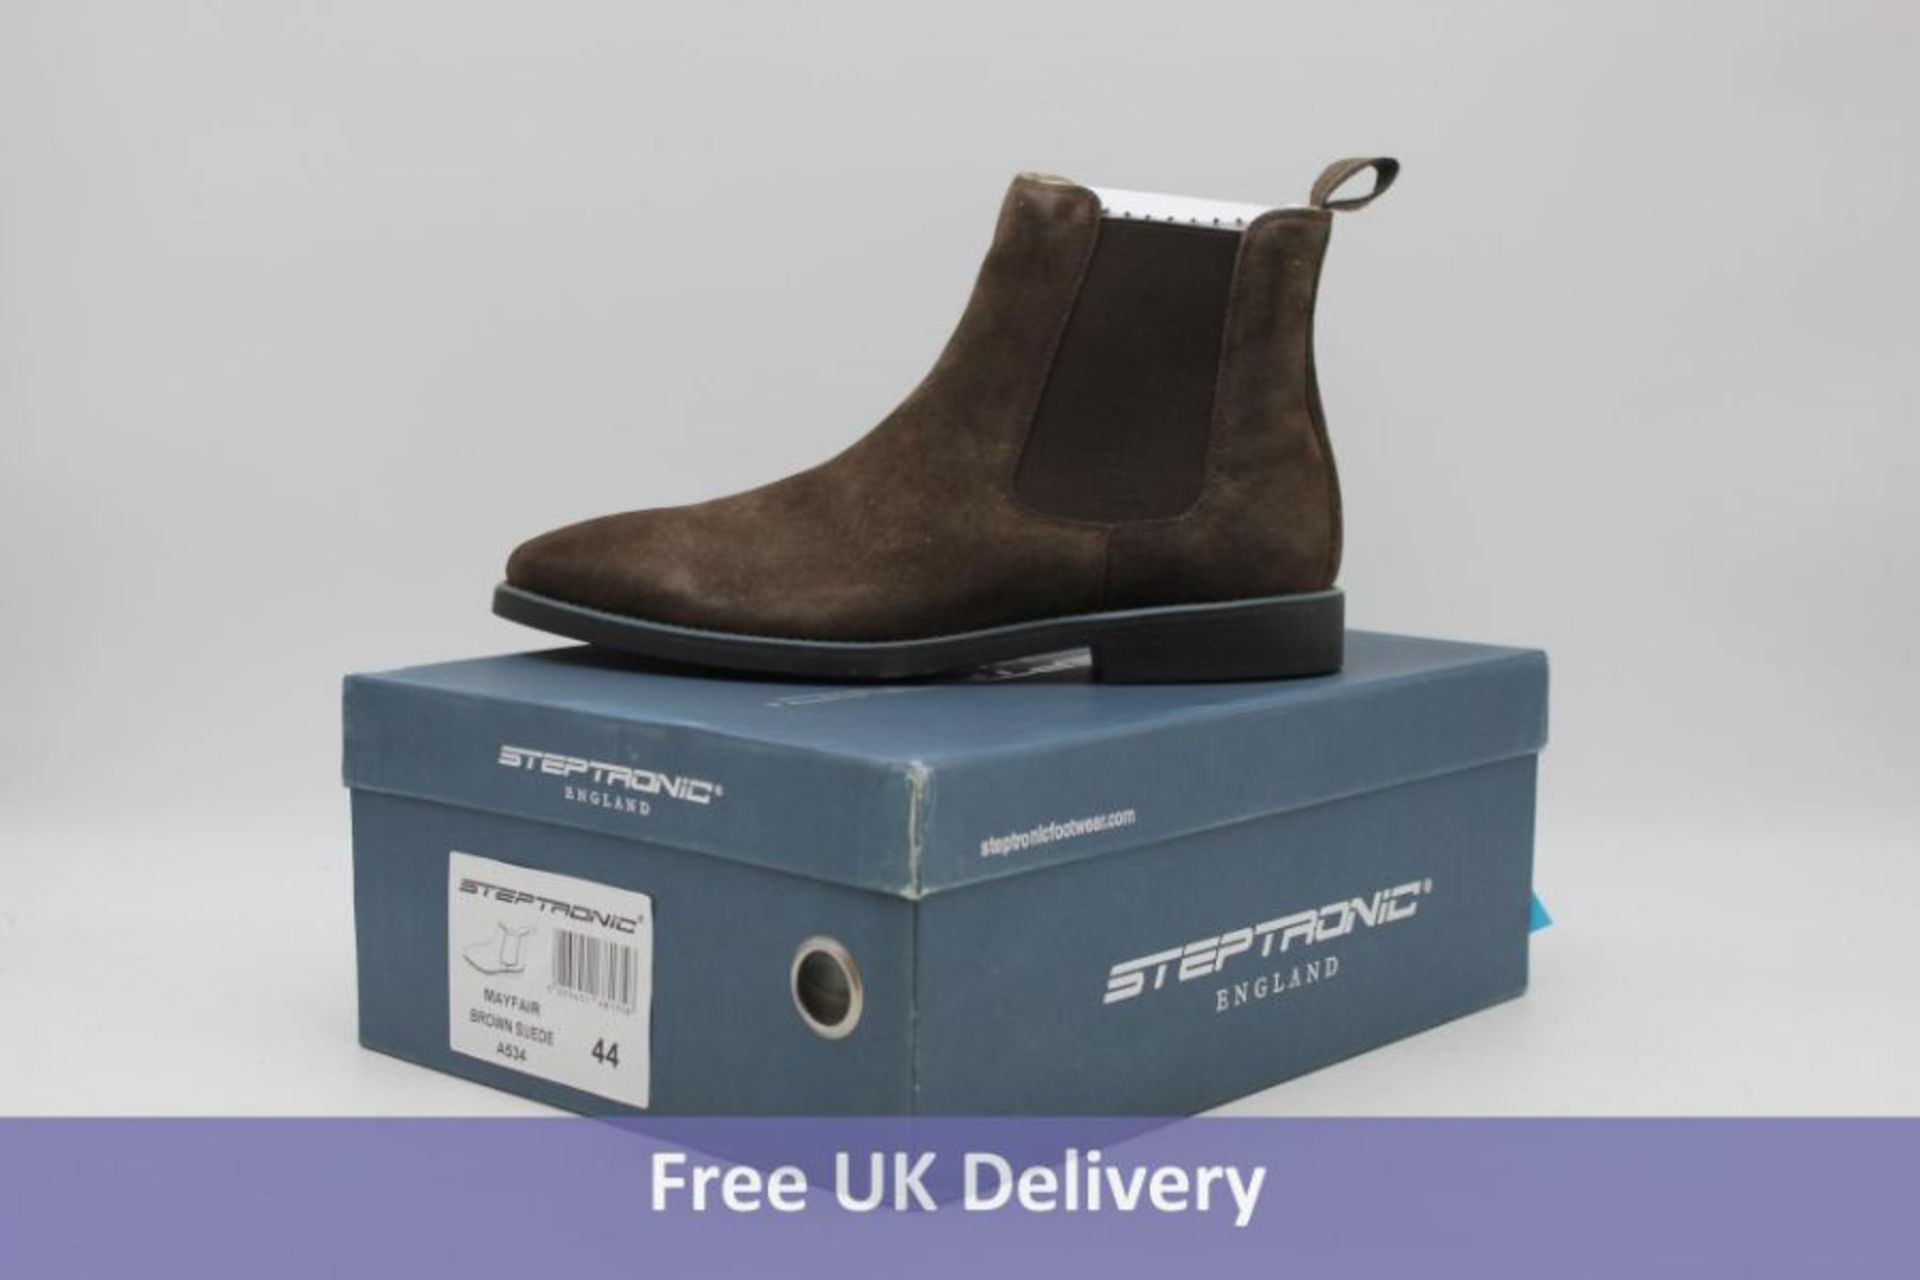 Steptronic Men's Mayfair Boots, Brown Suede, 44